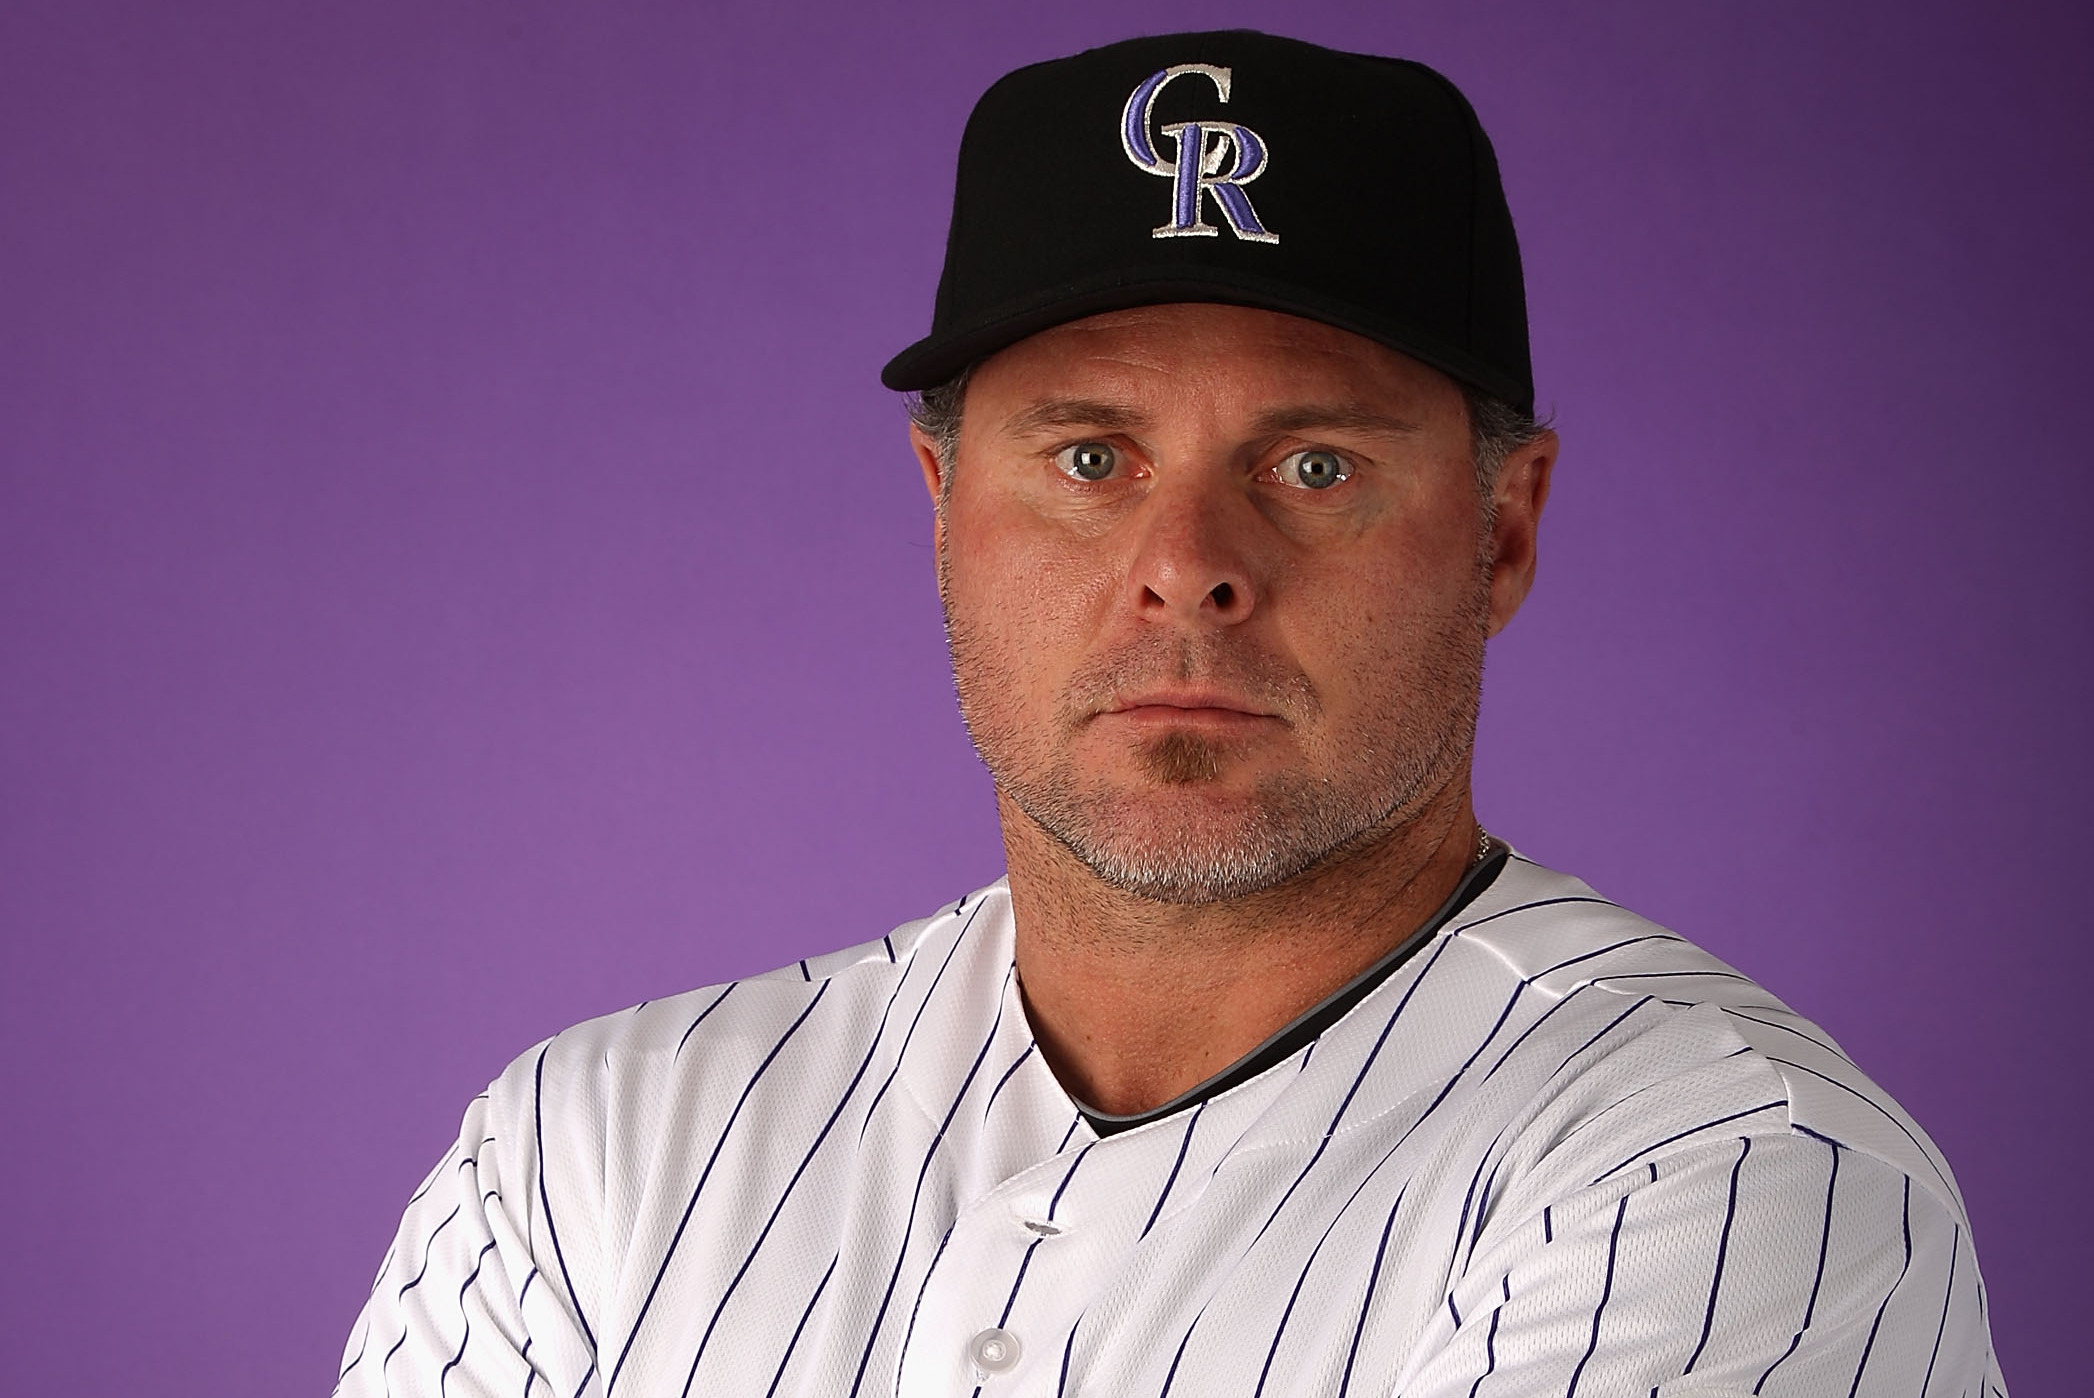 Rockies sign Giambi, Lindstrom to deals for next season – The Denver Post